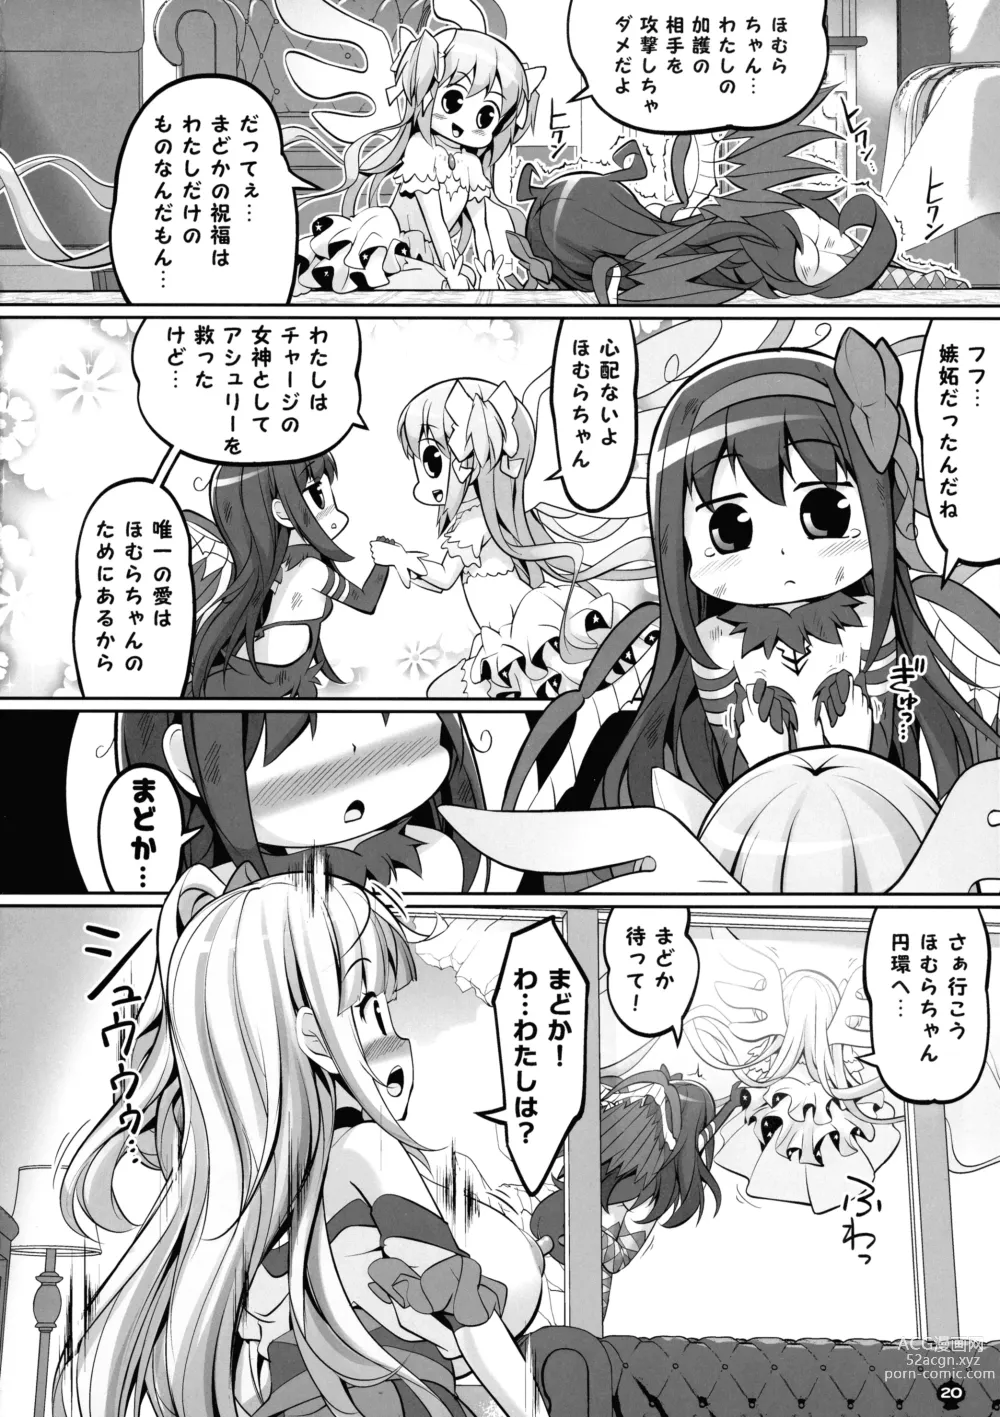 Page 20 of doujinshi Blast Super Chou Gorilla in HELL